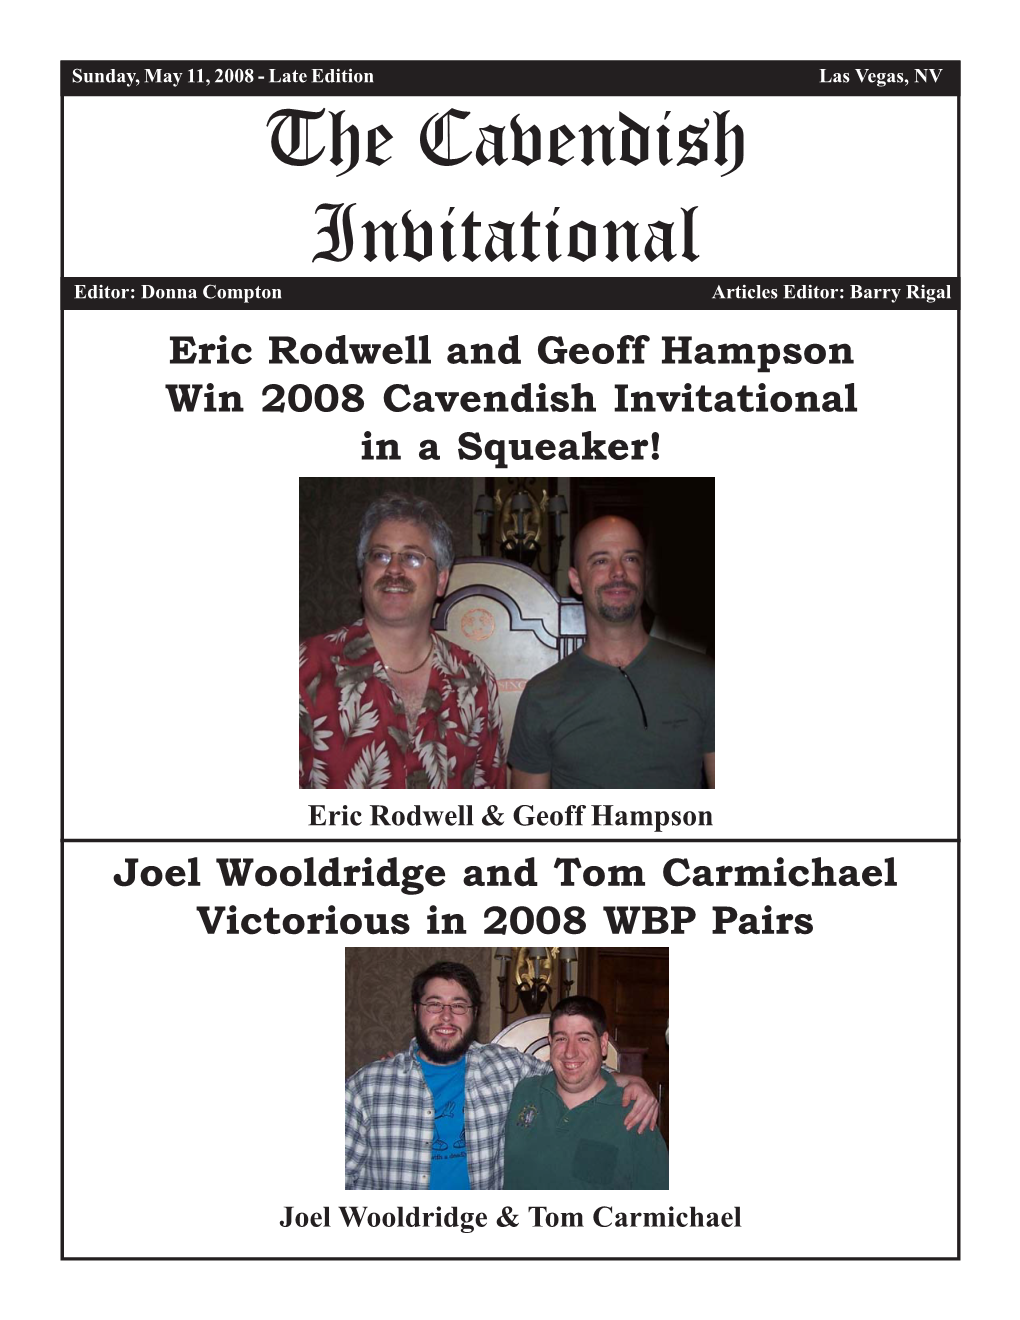 The Cavendish Invitational Editor: Donna Compton Articles Editor: Barry Rigal Eric Rodwell and Geoff Hampson Win 2008 Cavendish Invitational in a Squeaker!